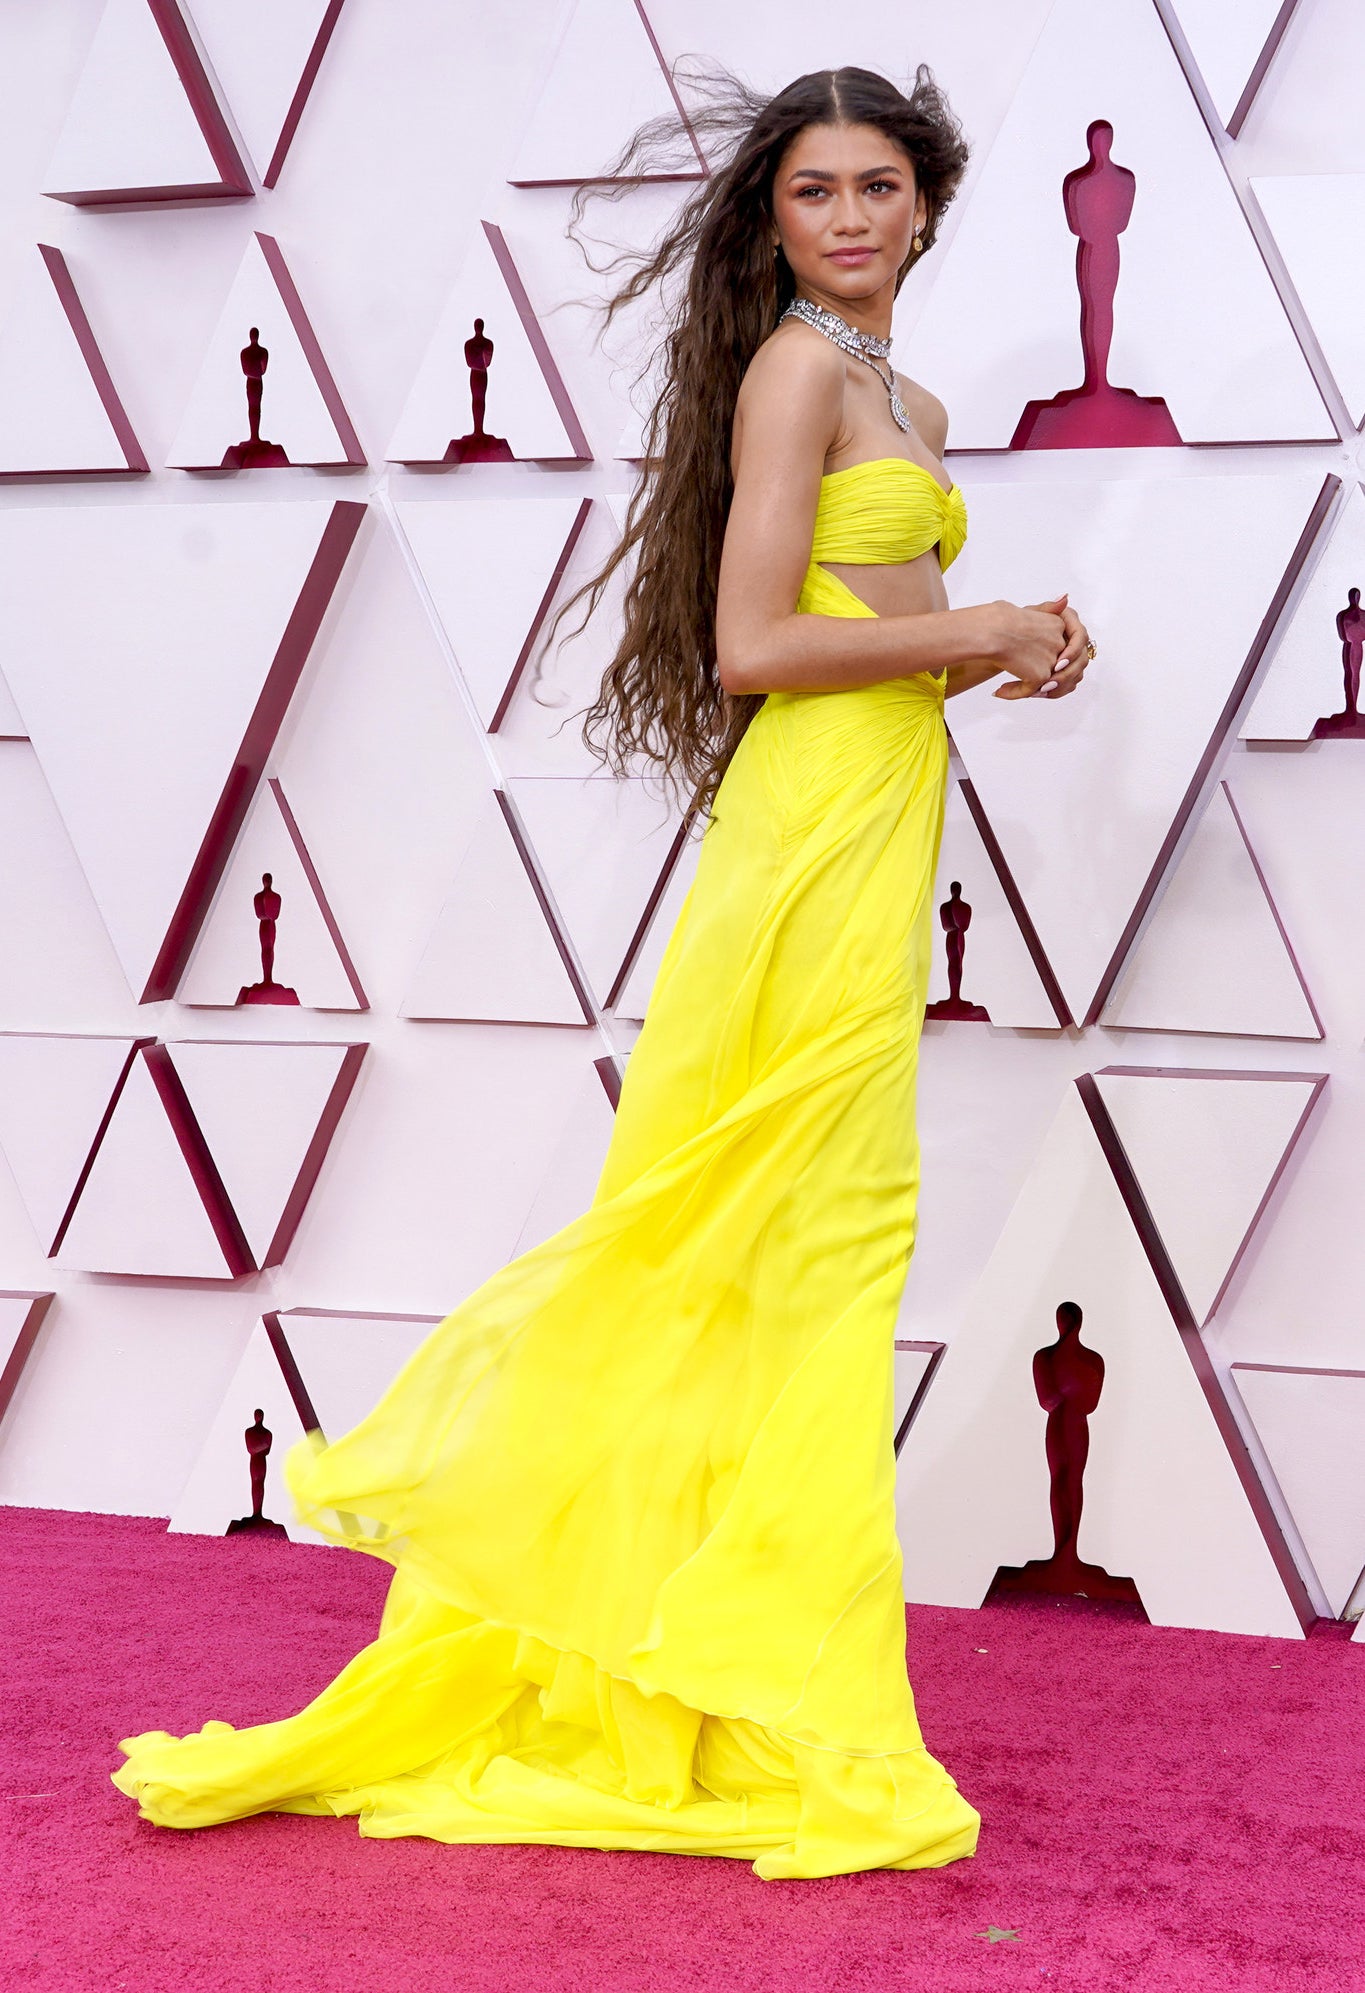 Zendaya wearing a bright yellow gown and her hair flowing